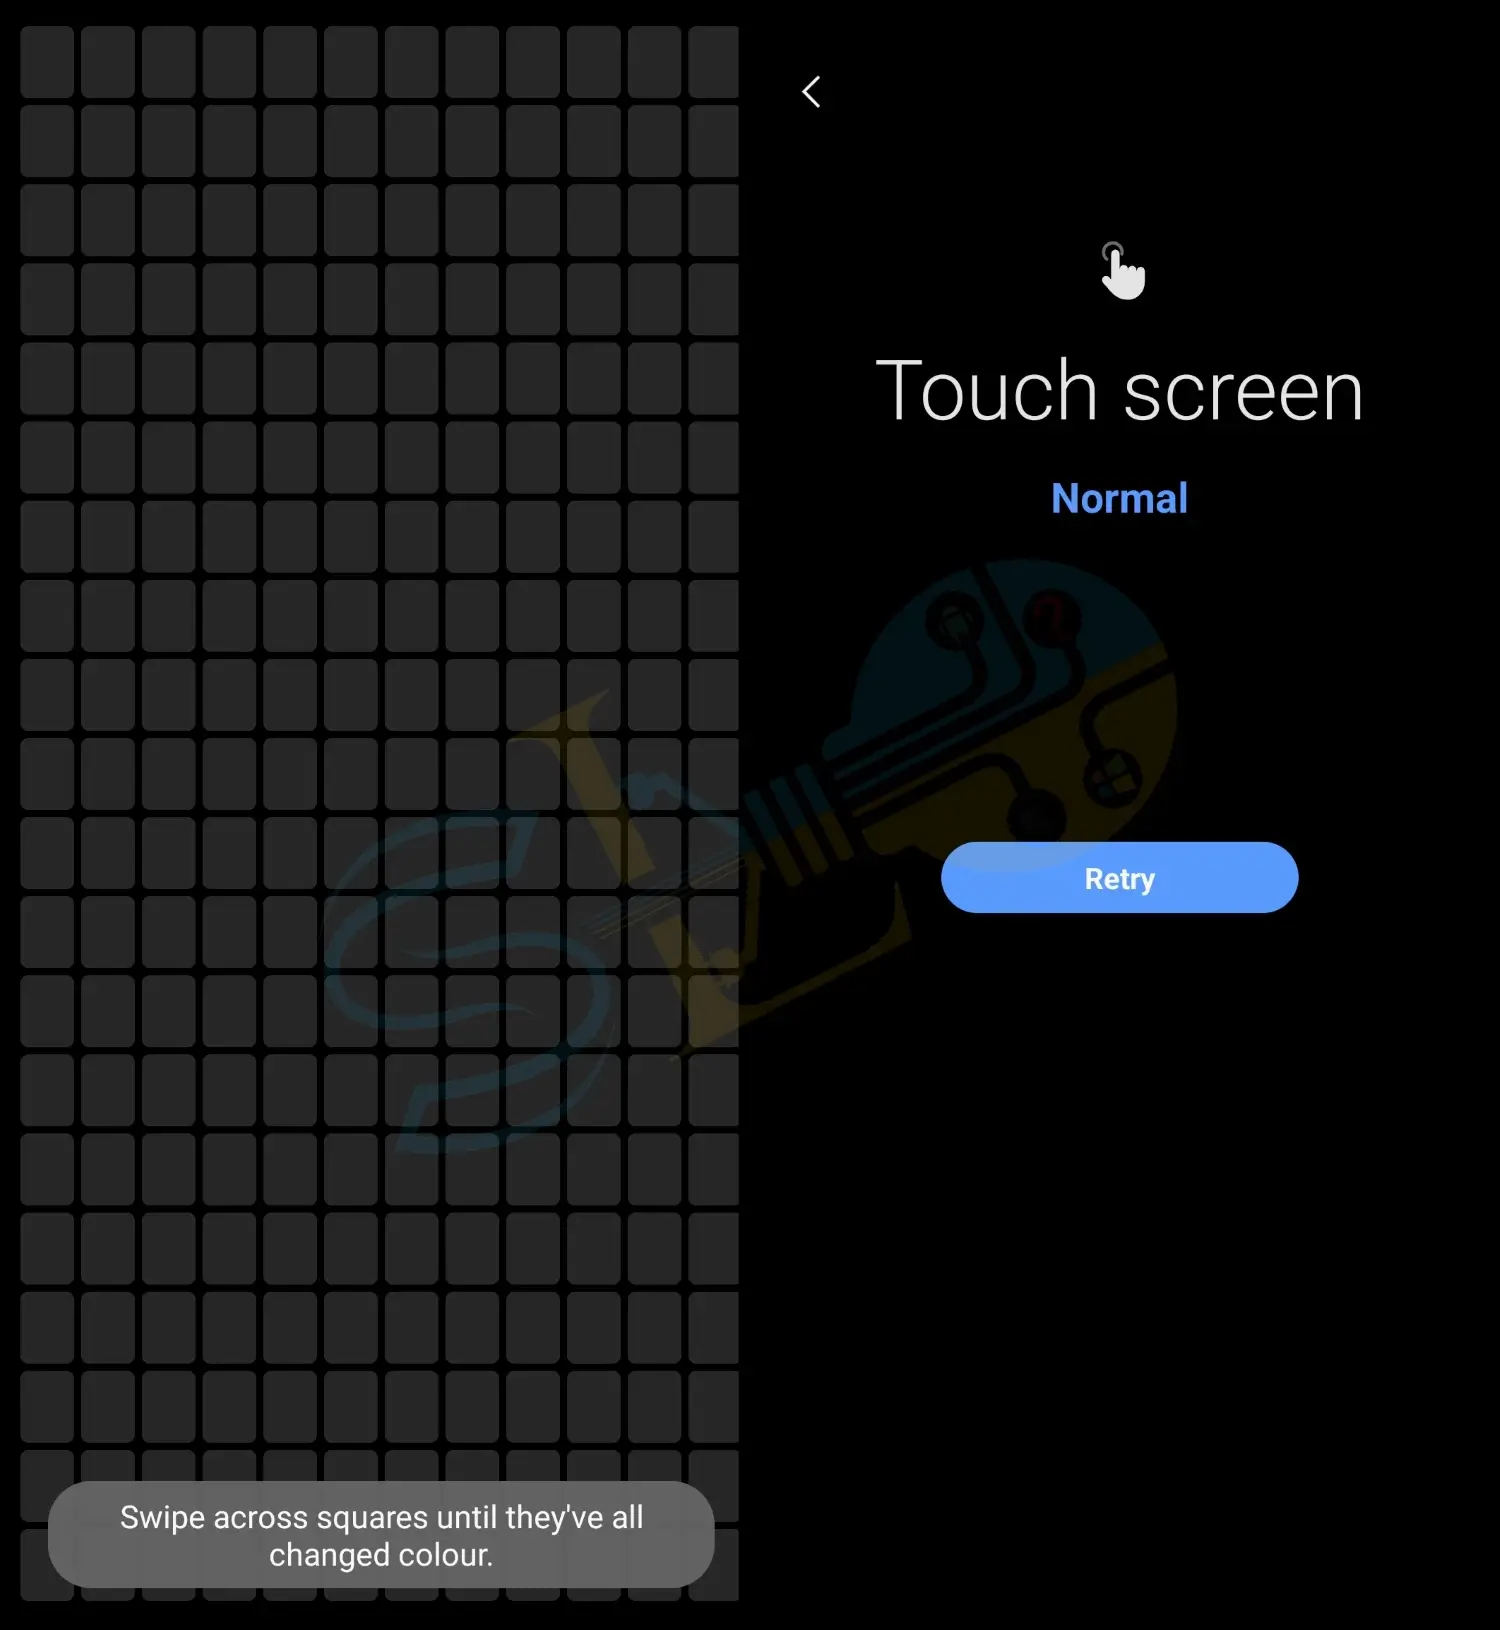 How to Test Touchscreen on Samsung Phones in 2 Ways in 2023